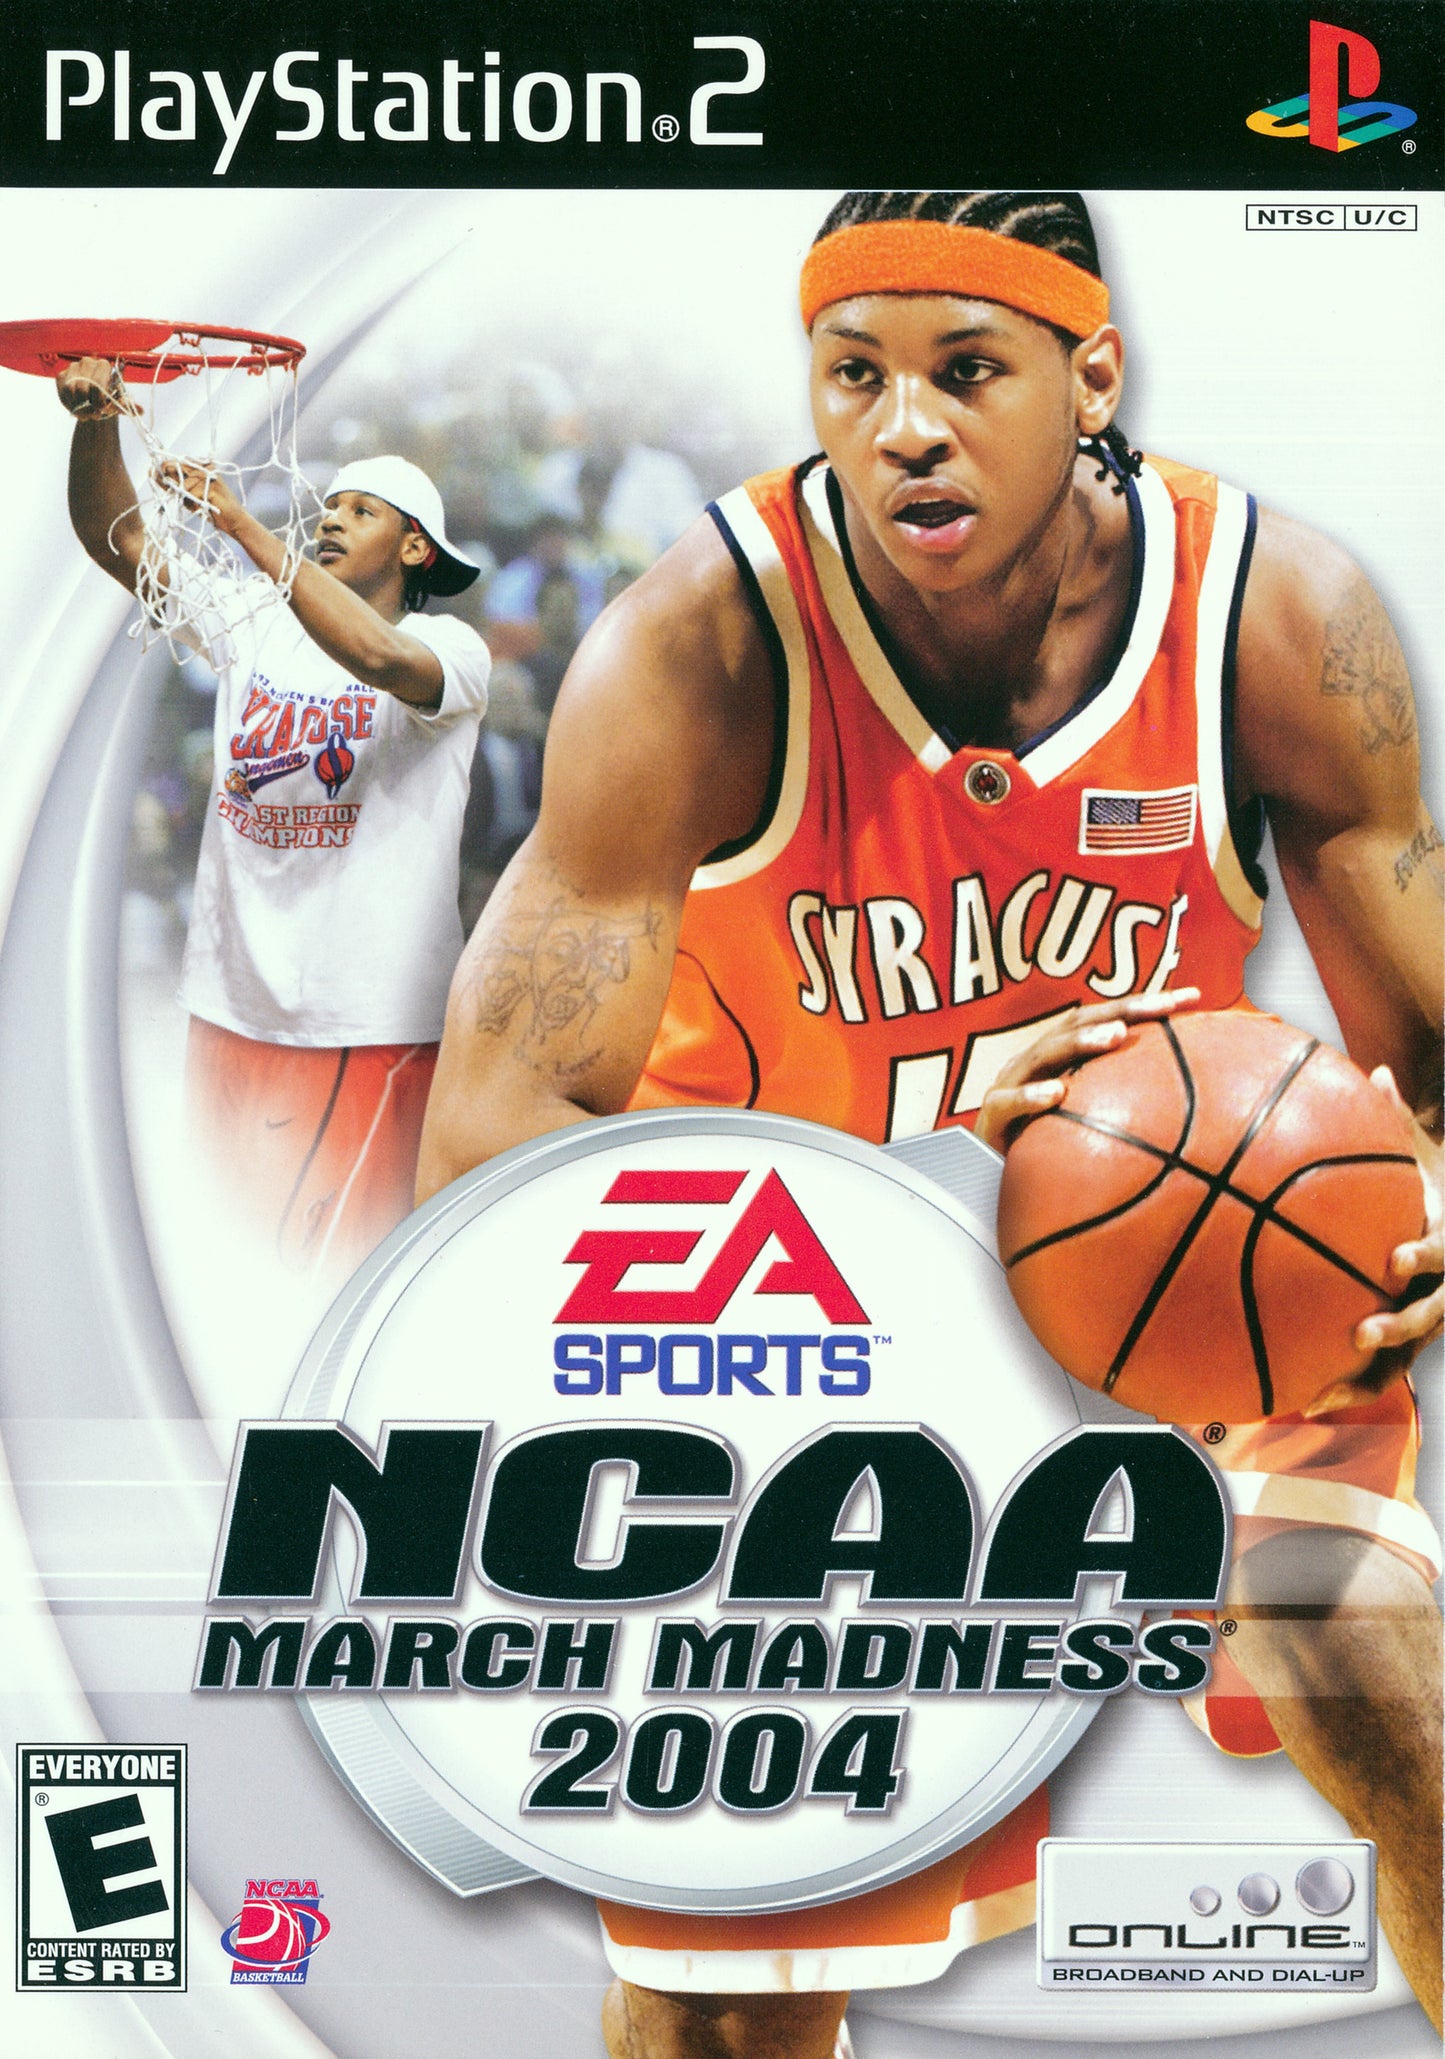 NCAA March Madness 2004 - PlayStation 2